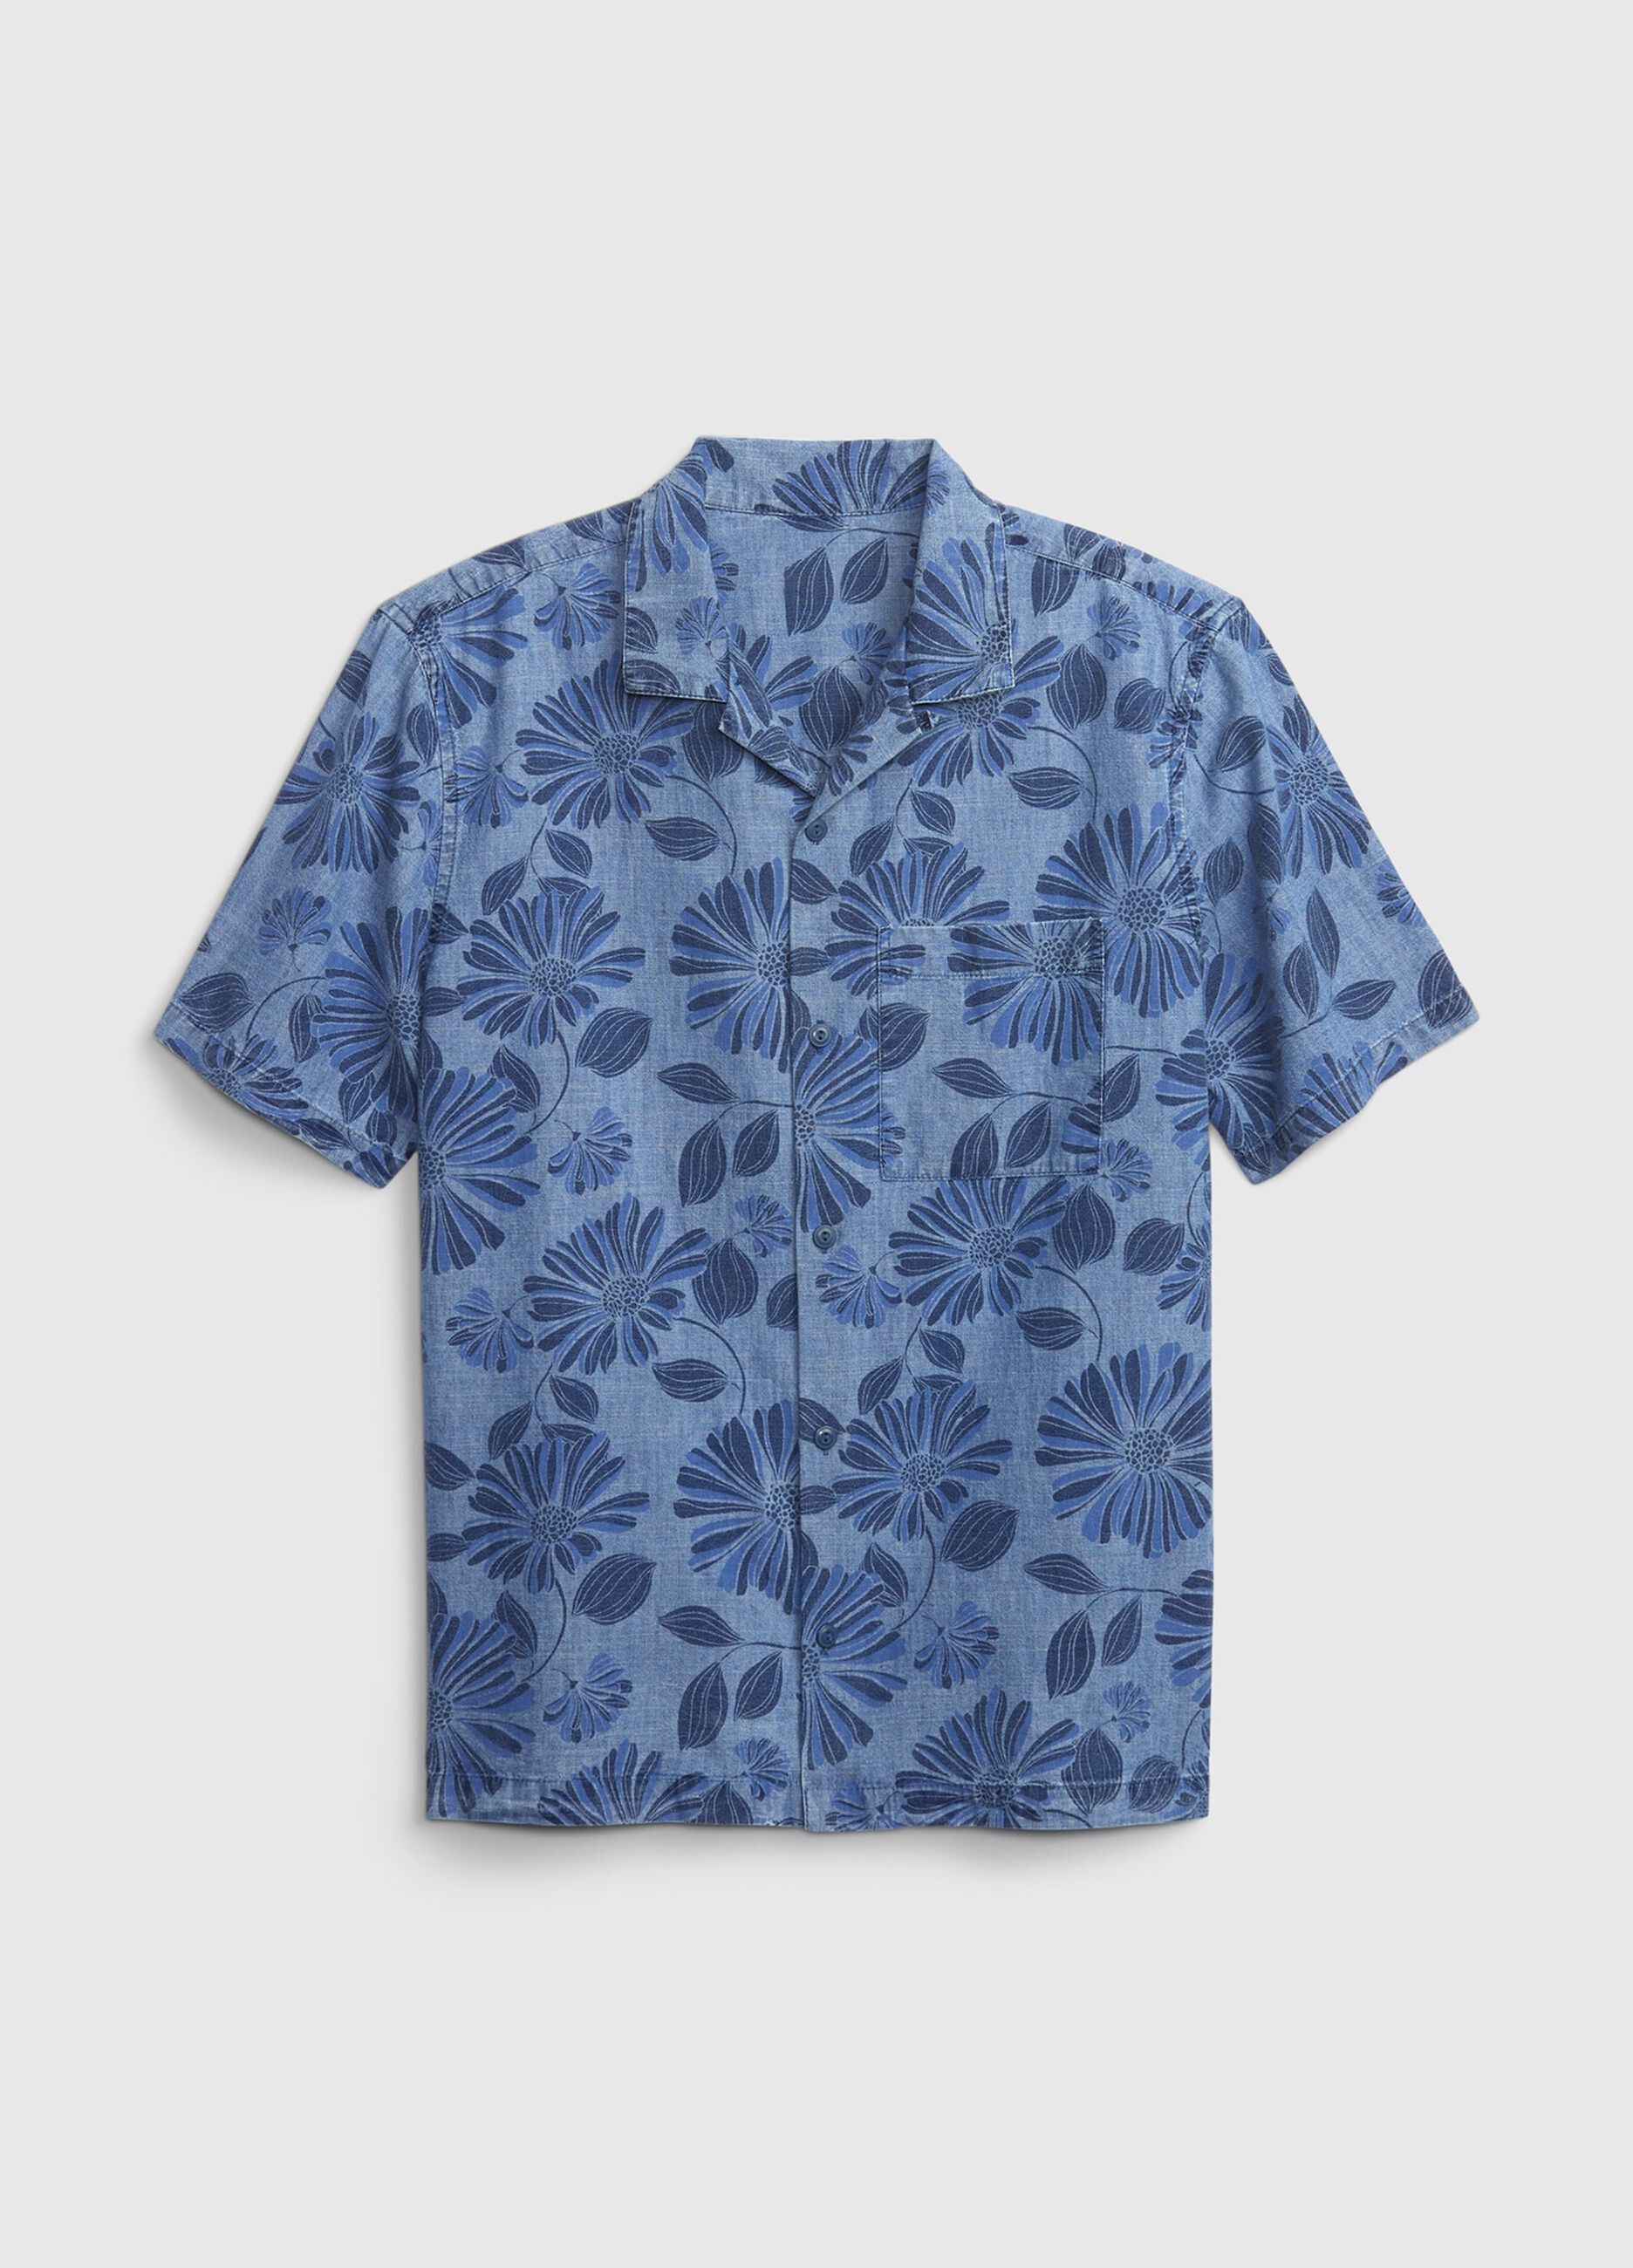 Short-sleeved shirt in chambray cotton